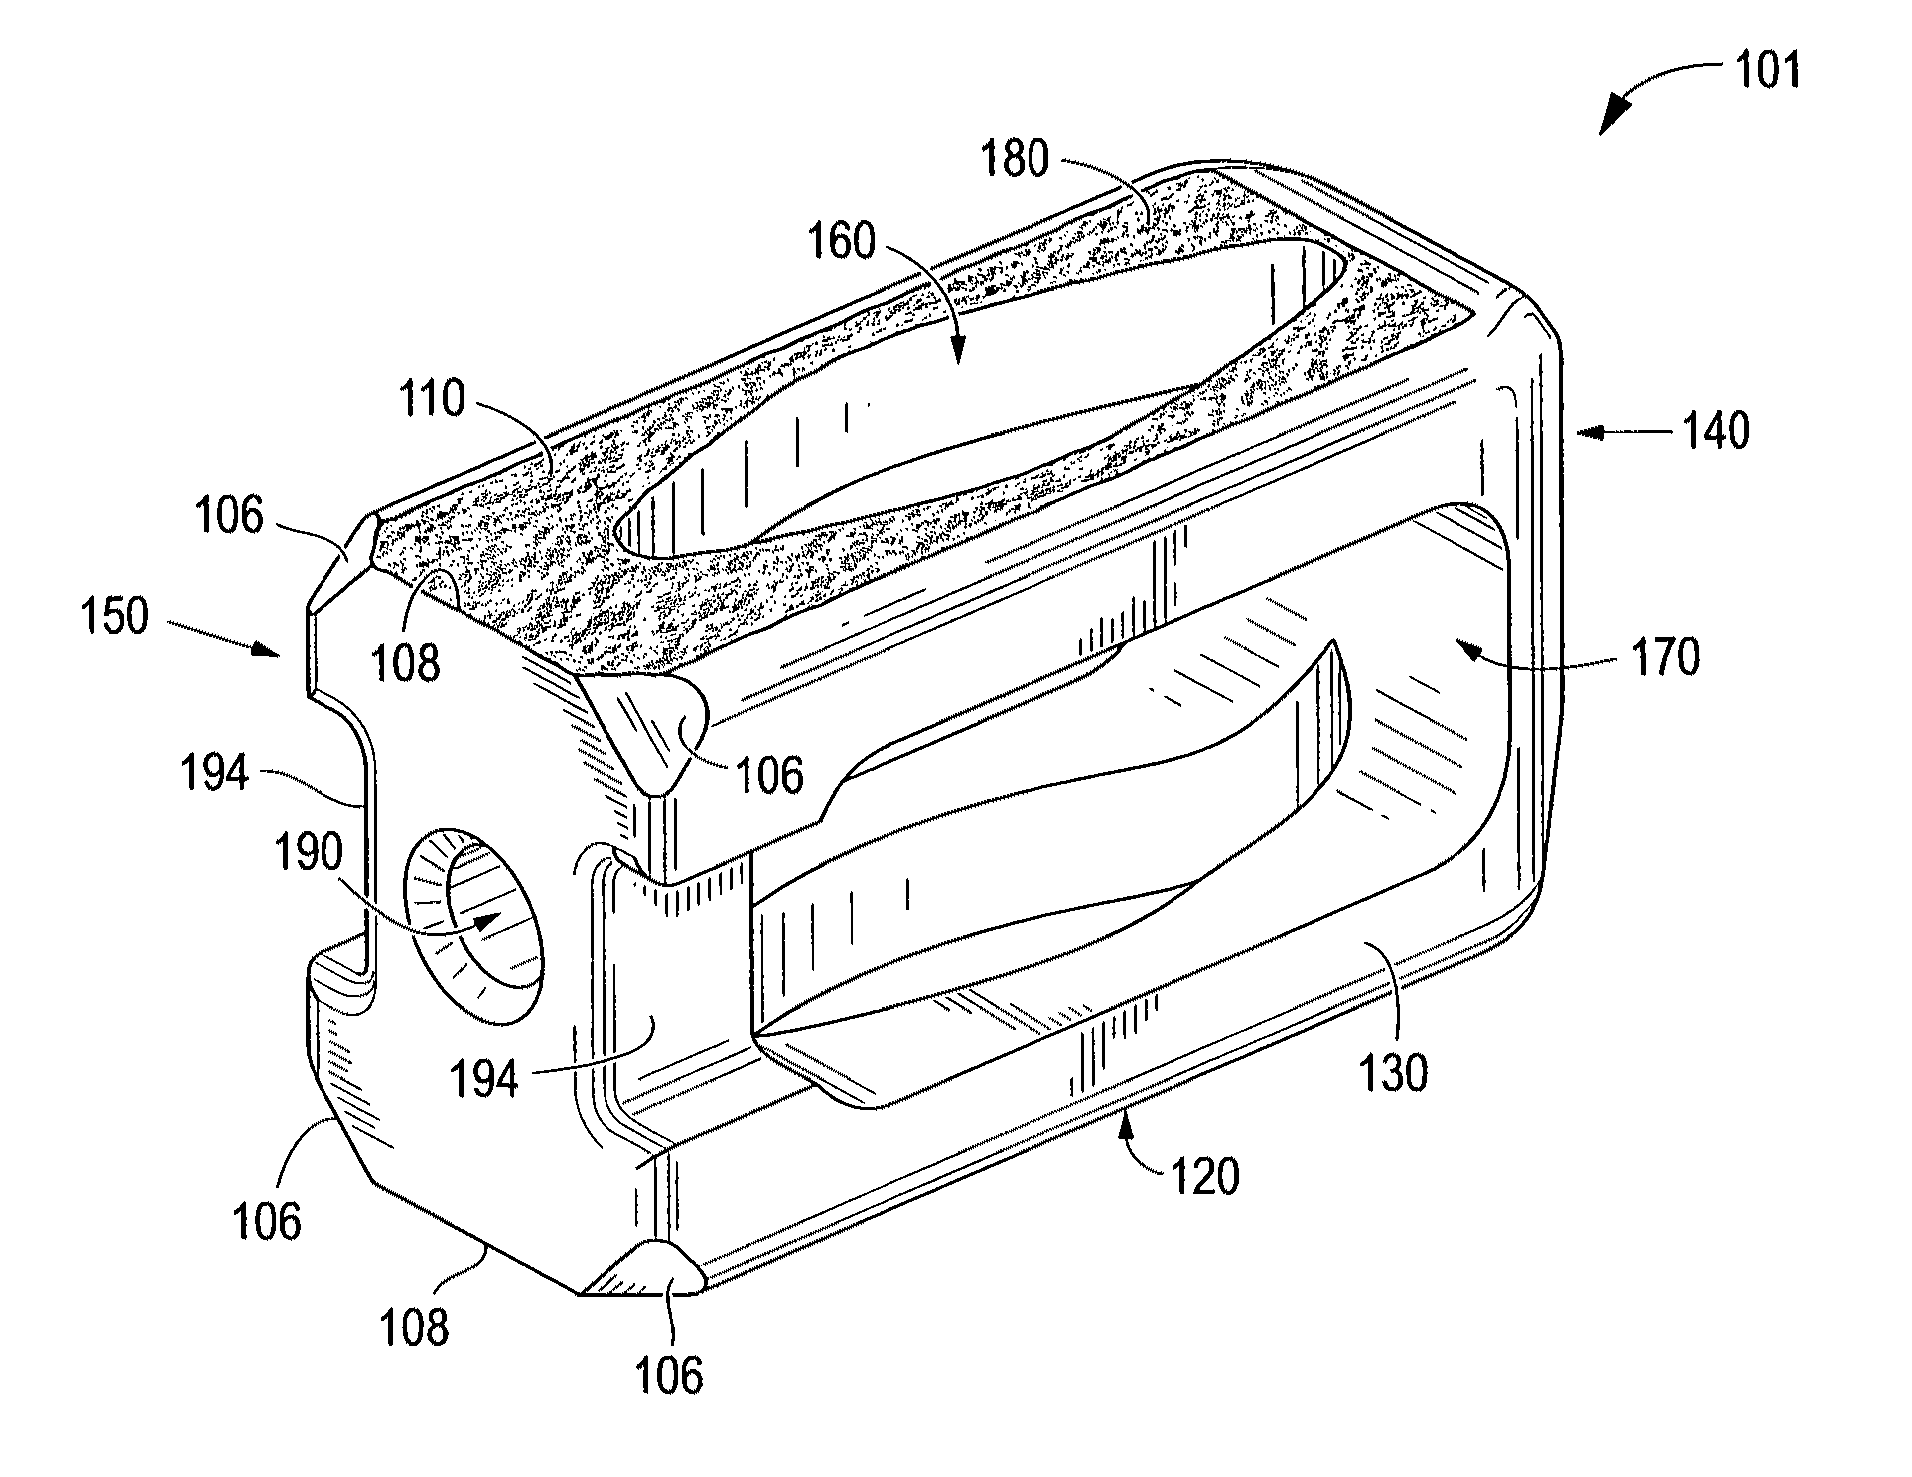 Composite interbody spinal implant having openings of predetermined size and shape